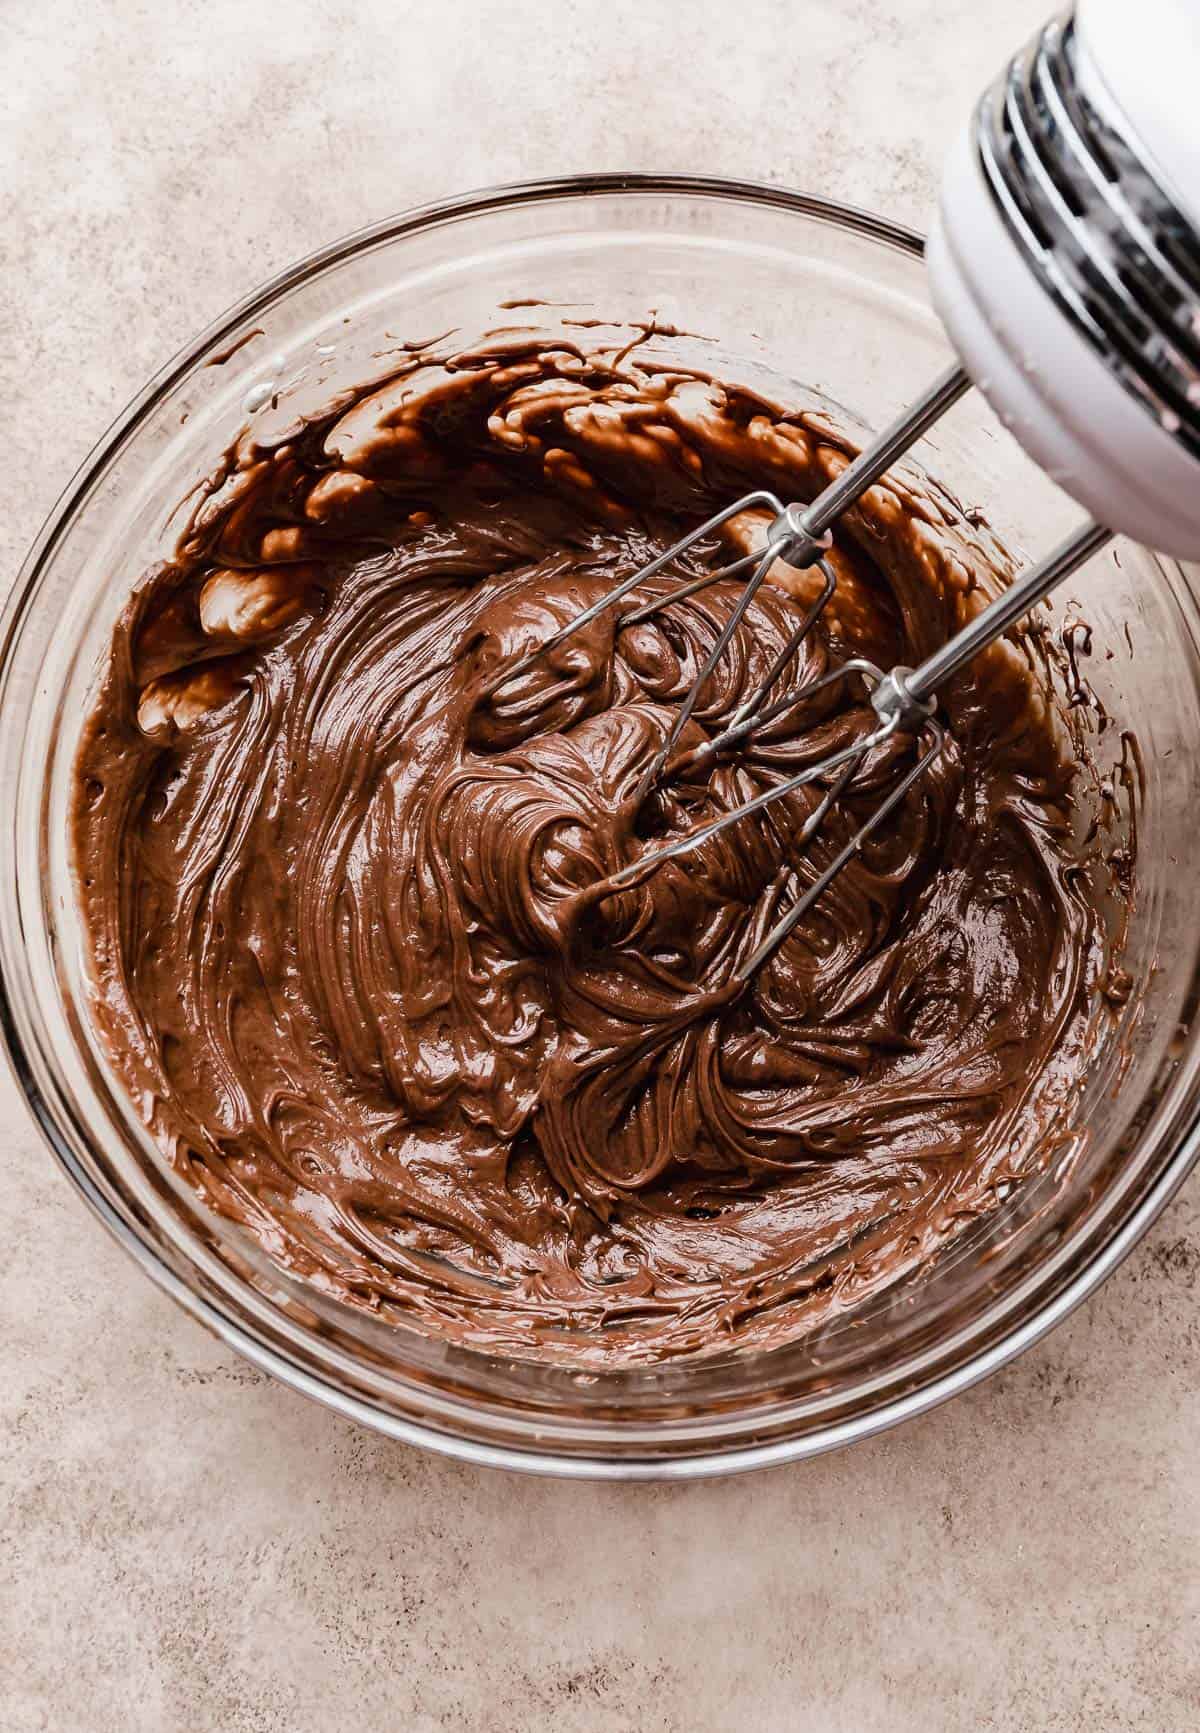 Hand beaters mixing Nutella and whipped cream to make a homemade whipped Nutella.